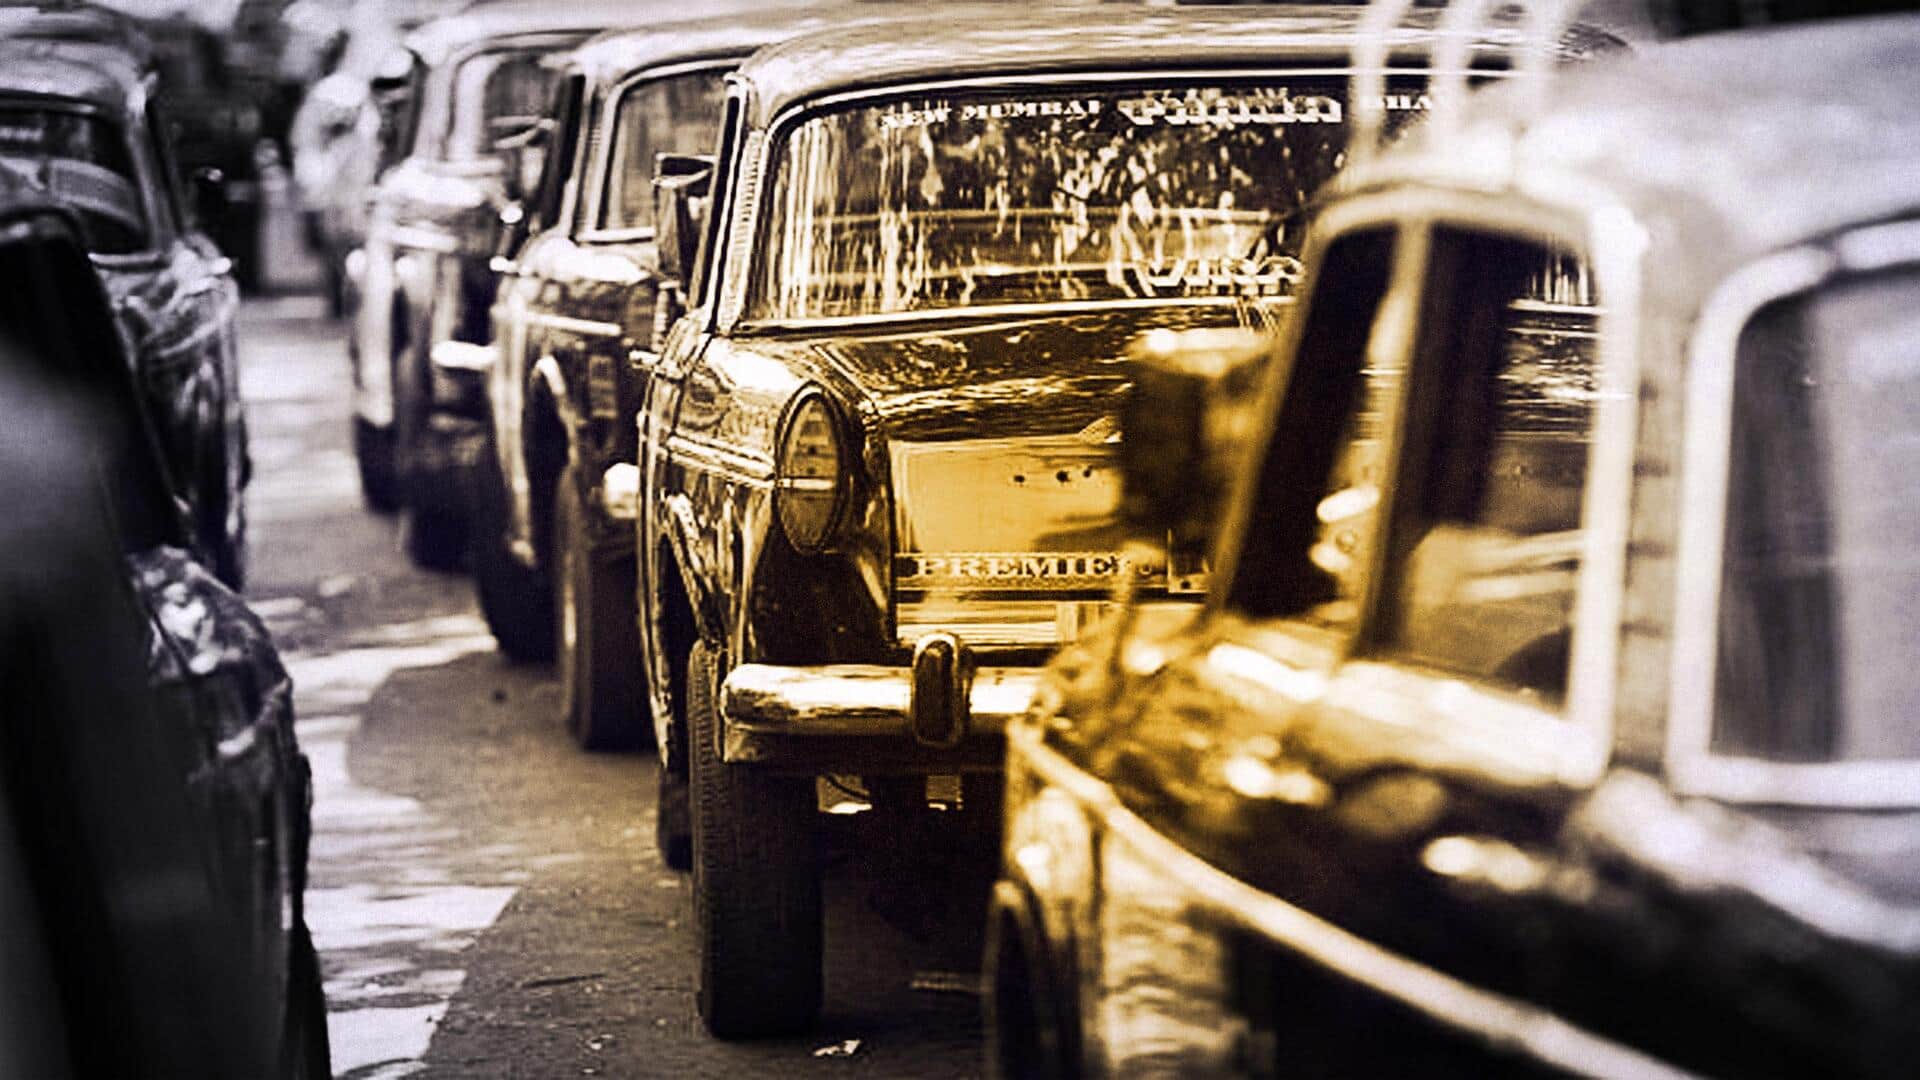 Mumbai's iconic 'Premier Padmini' taxis retiring after 6 decades